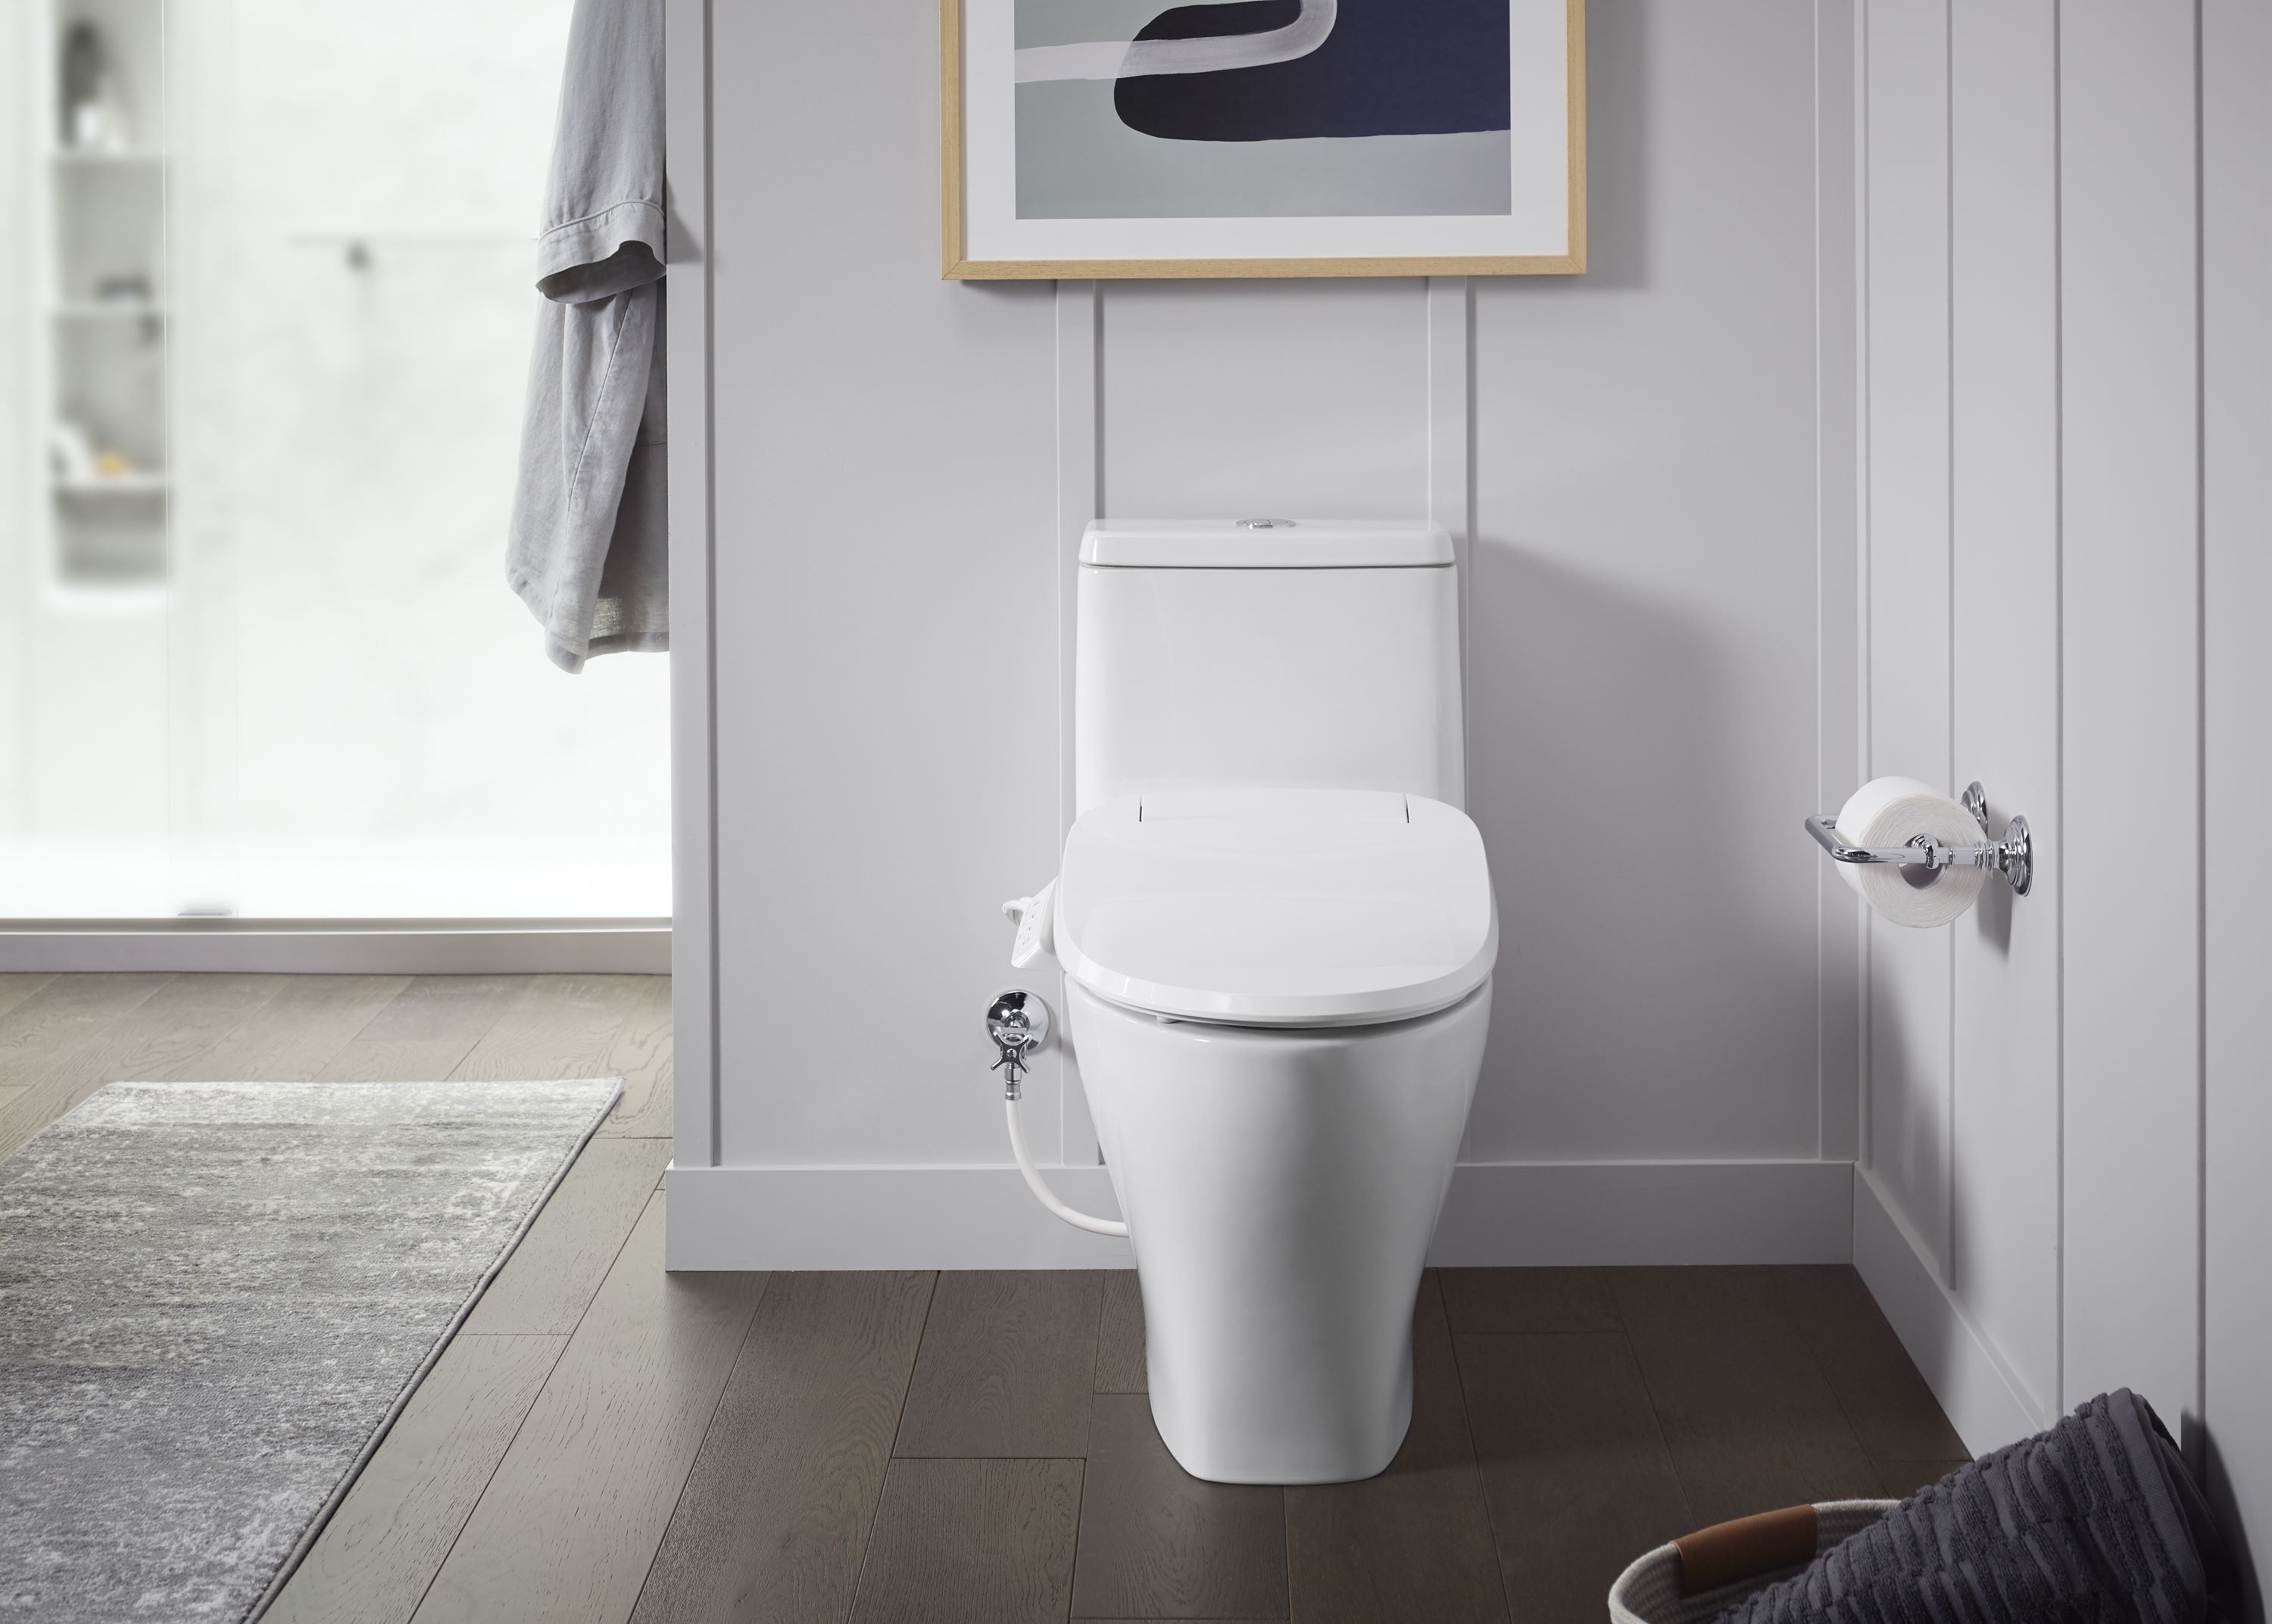 Bidet style toilets are a popular choice for new homes and with both WaterSense and ADA certification, ideal for occupant comfort and water conservation. Photo courtesy of Kohler.